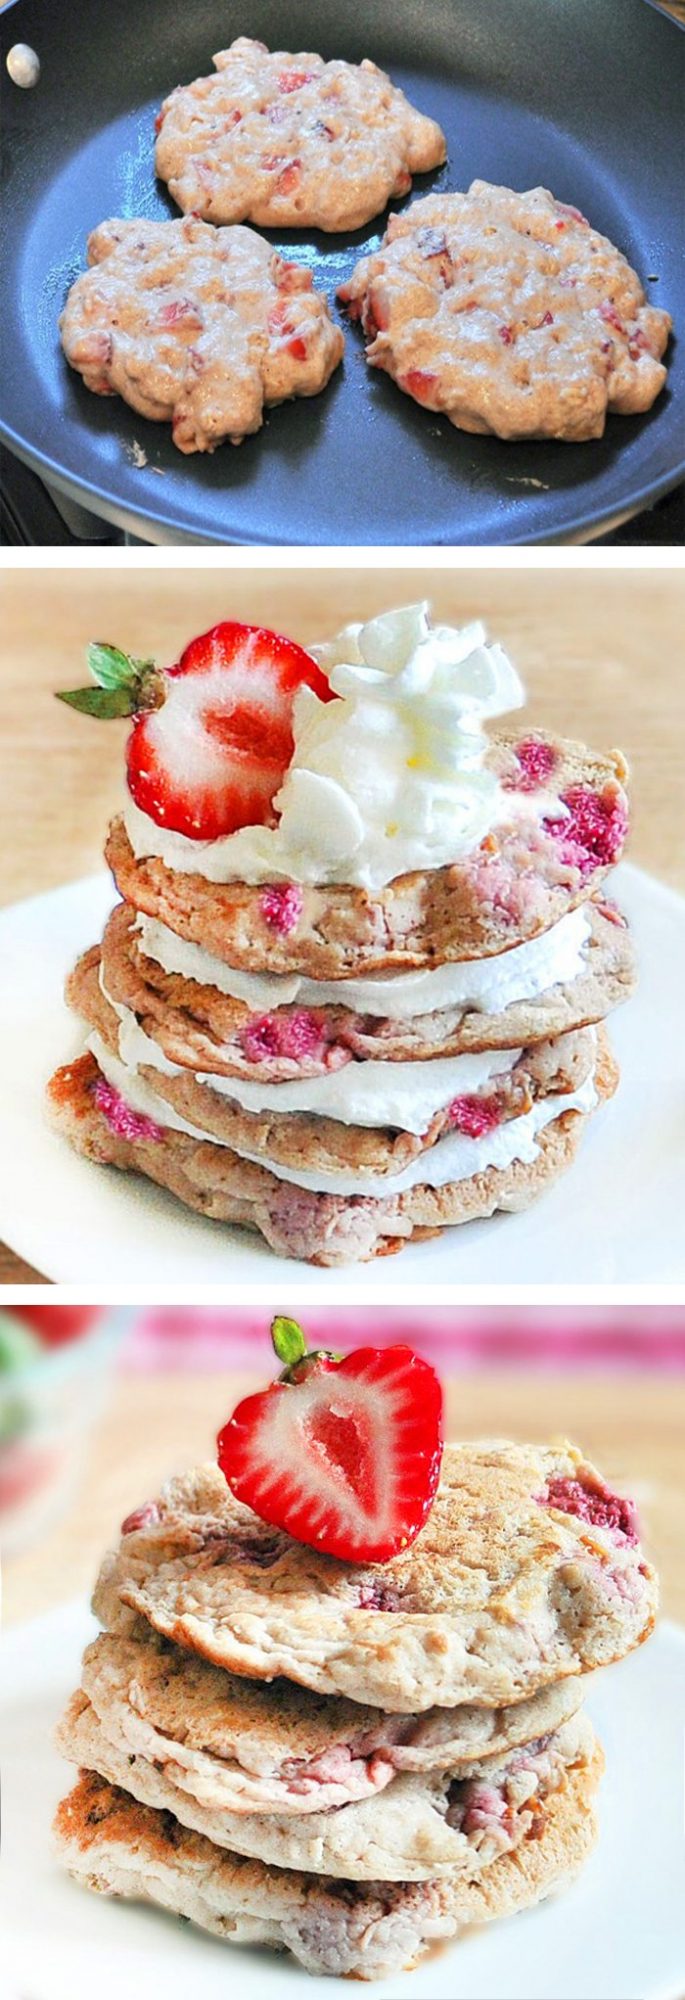 Strawberry Pancakes - Ingredients: 1/2 cup strawberries, 1/3 cup rolled oats, 1 tsp baking powder, 1 tsp vanilla, 2 tsp... Full recipe: https://chocolatecoveredkatie.com/2011/07/12/strawberry-shortcake-pancakes/ @choccoveredkt